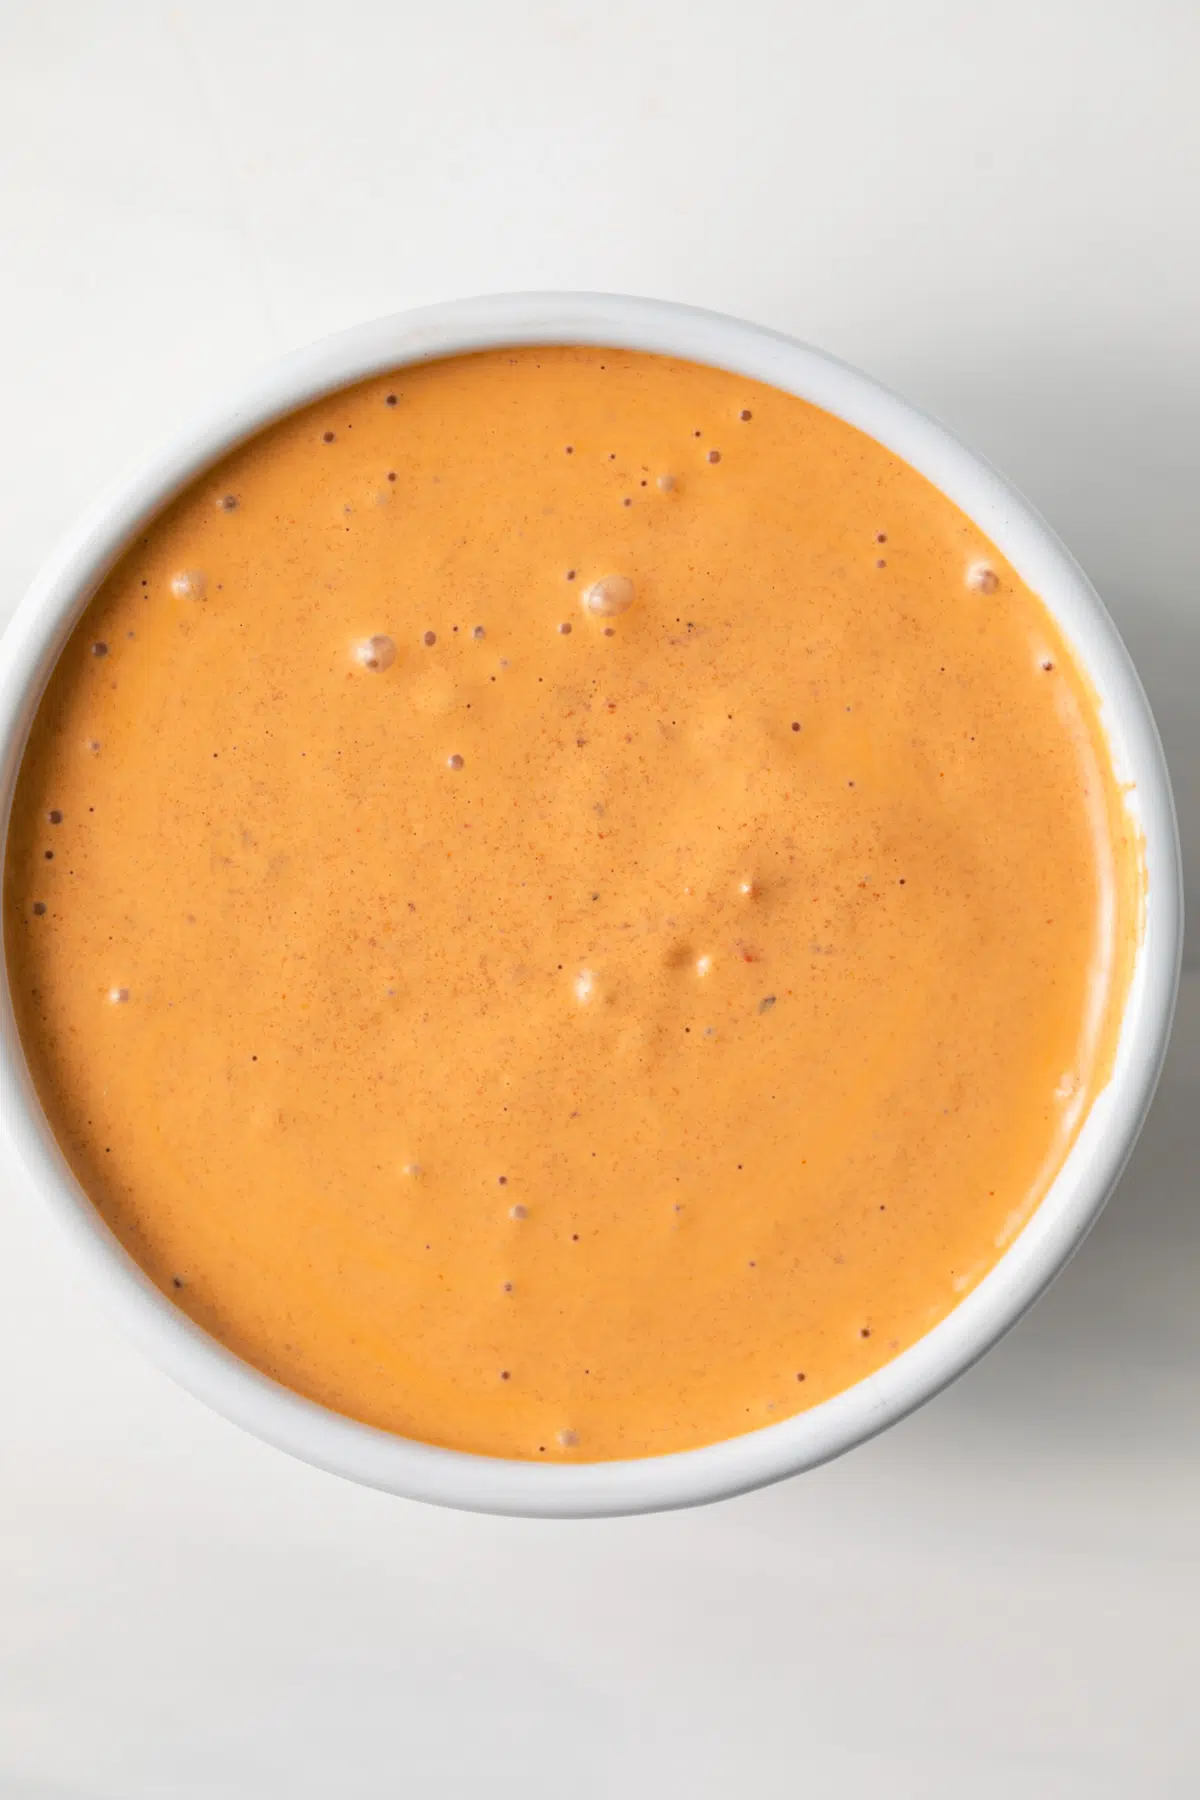 Bowl of chipotle sauce.